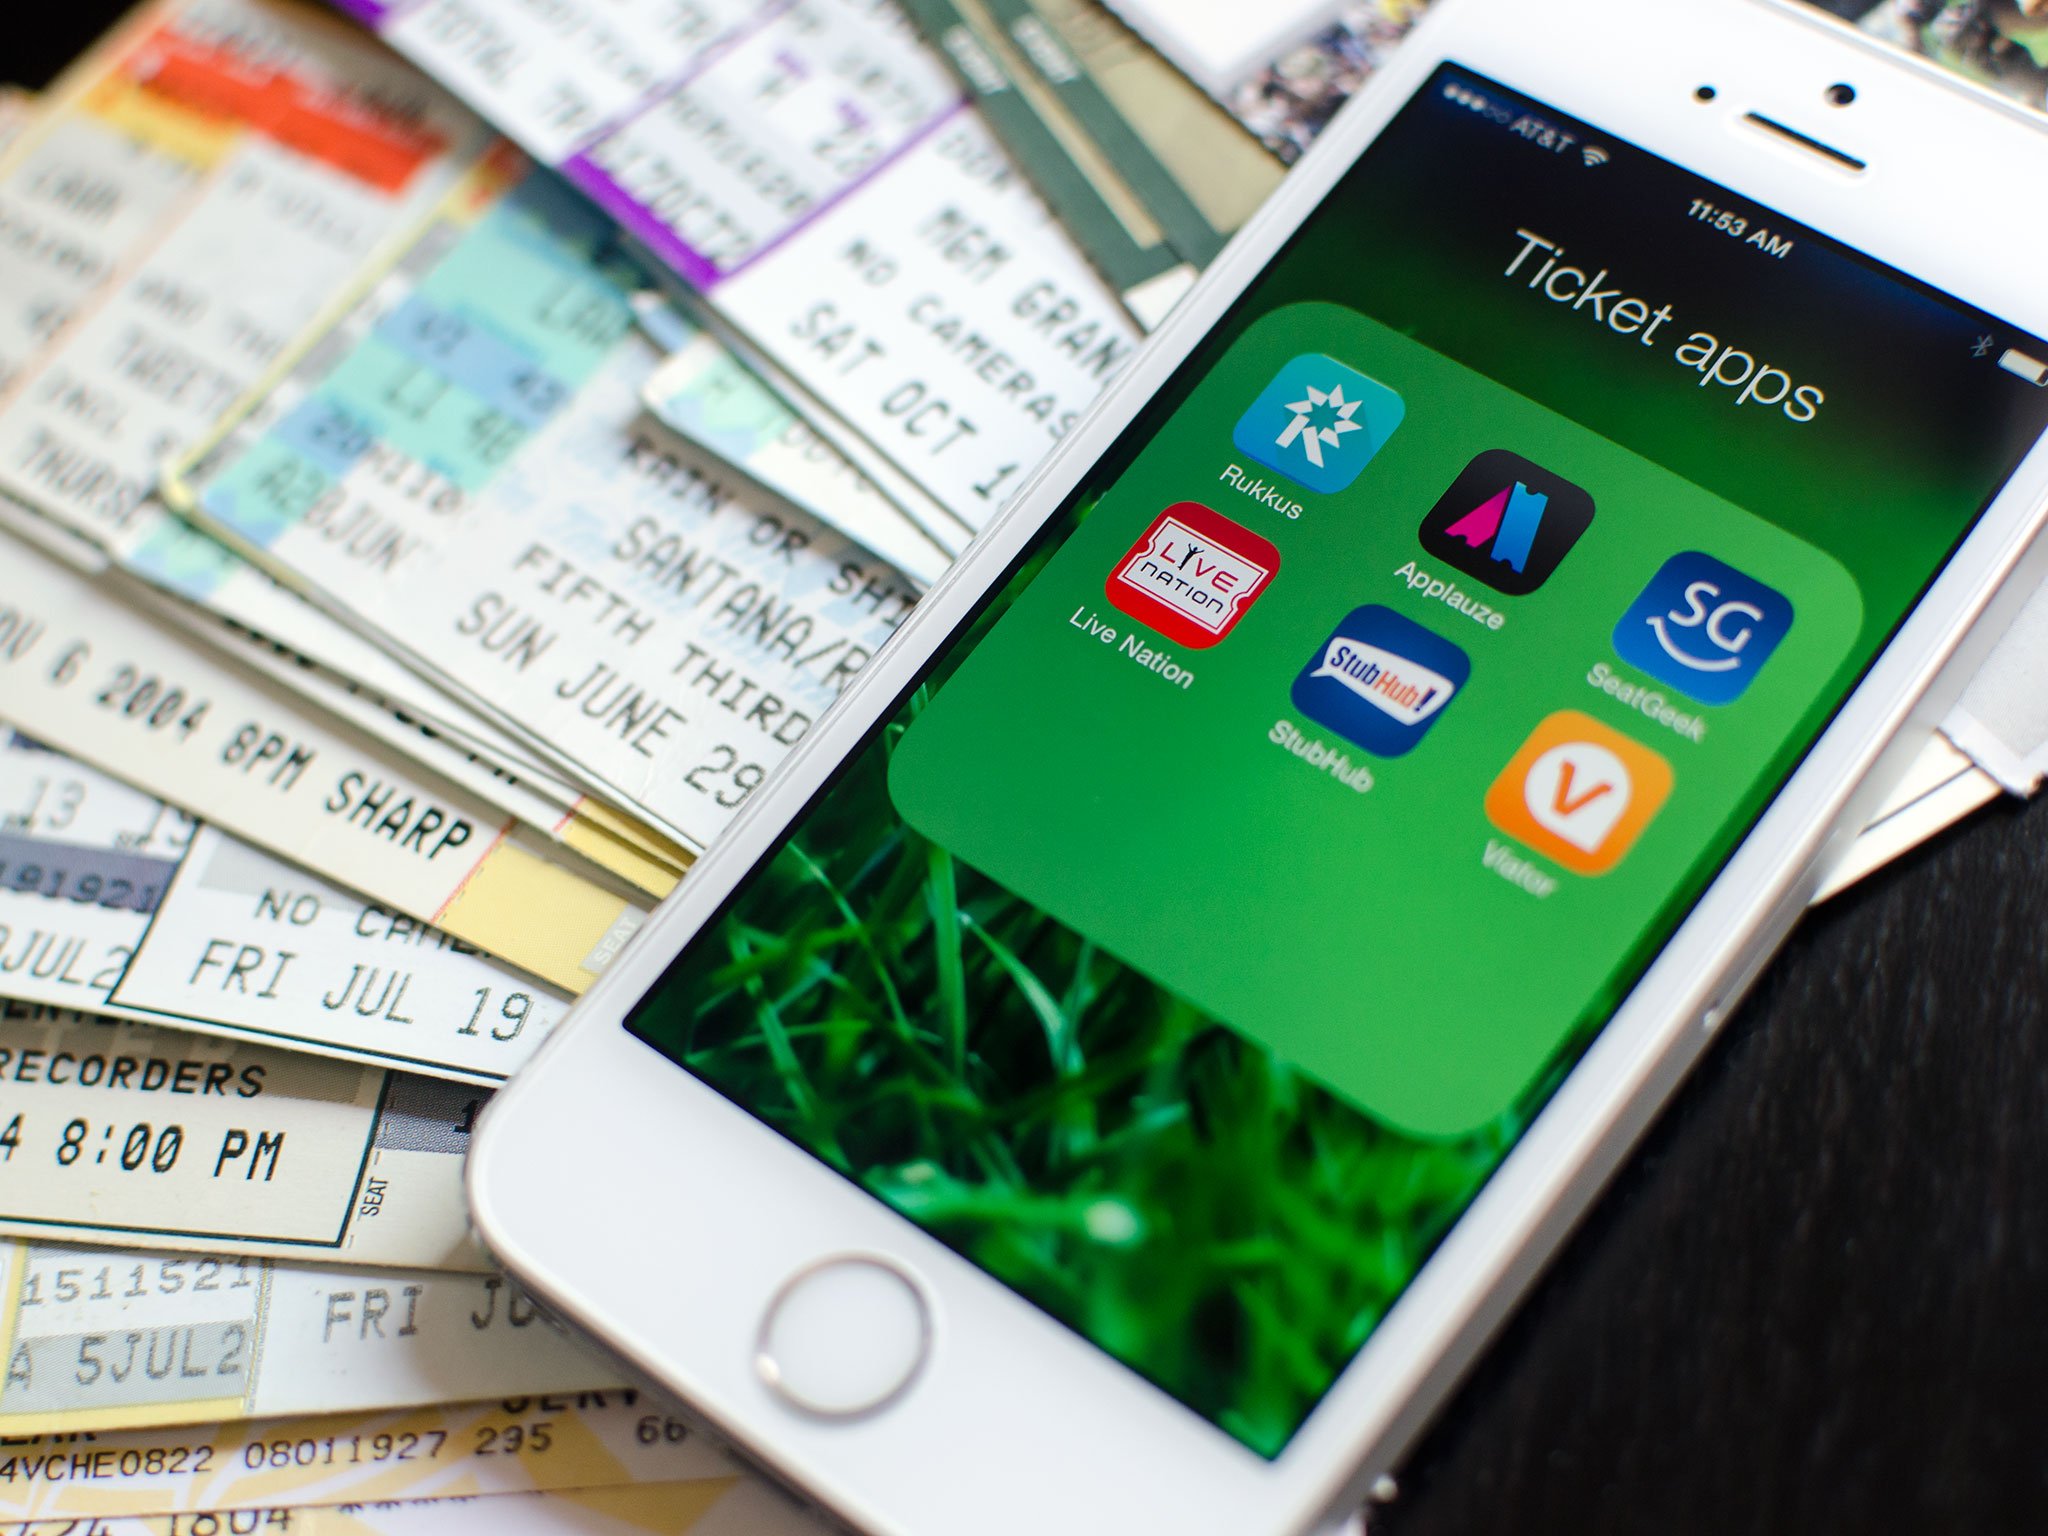 Best ticket finder apps for iPhone: Rukkus, Applauze, SeatGeek, and more!